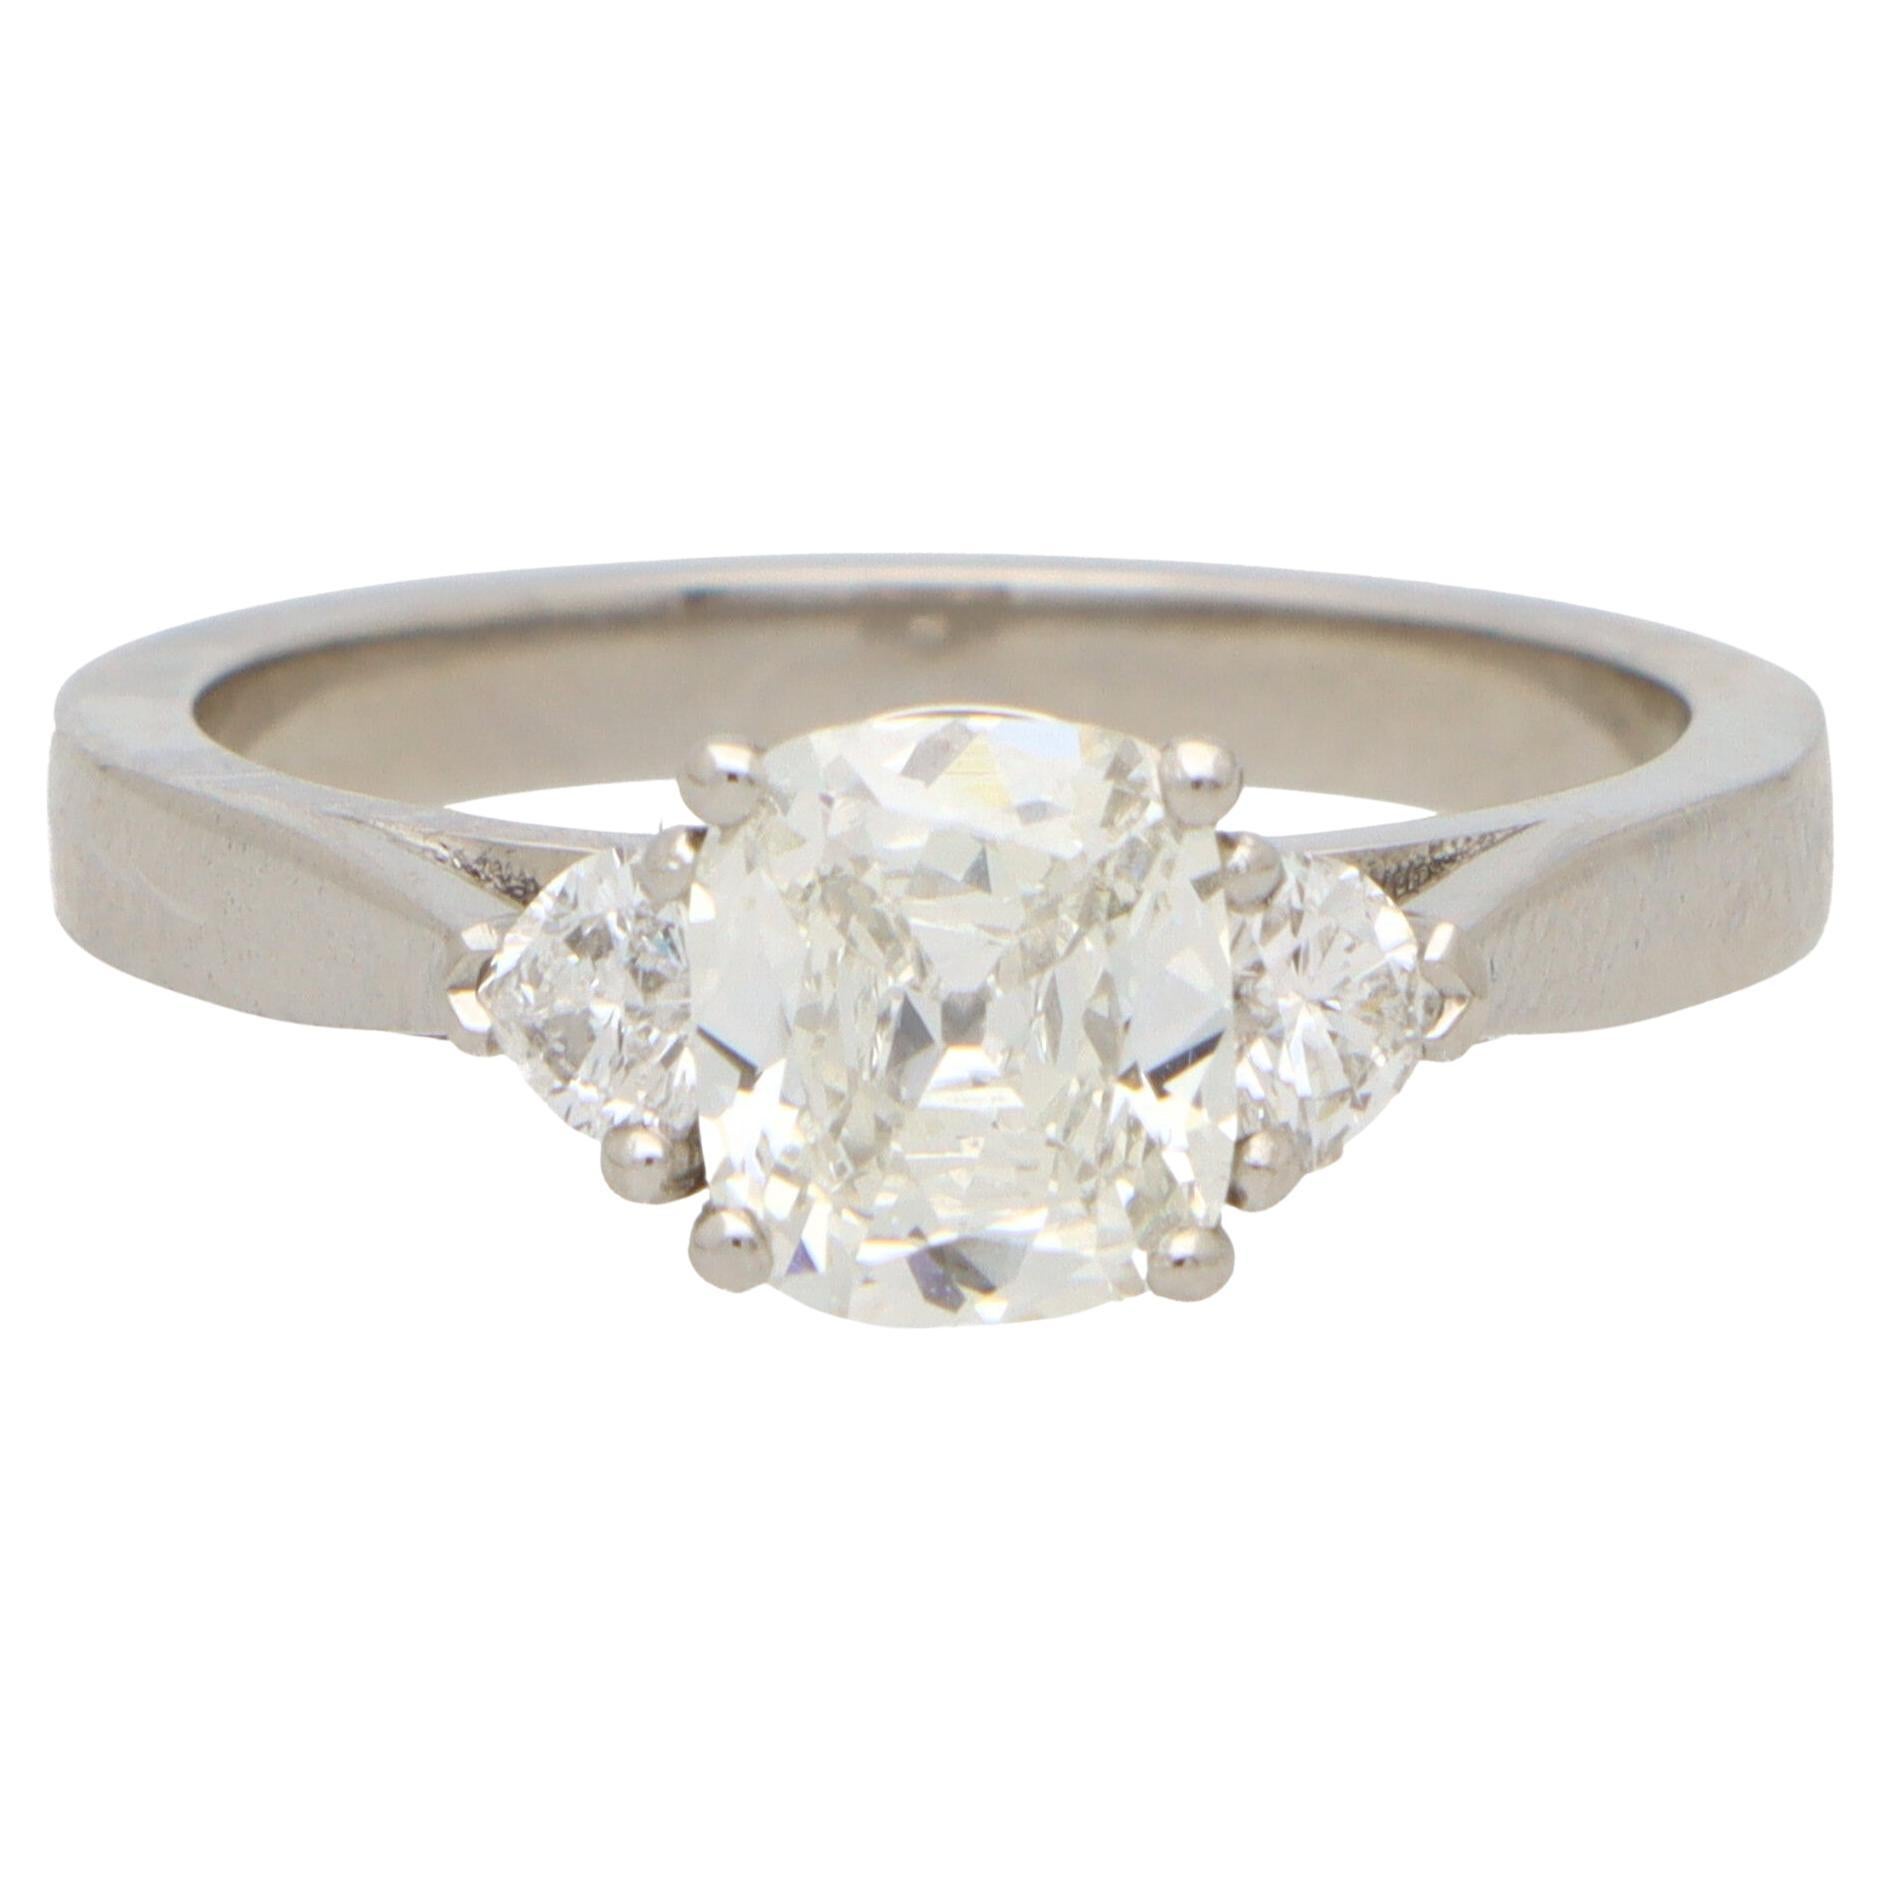 GIA Certified Cushion and Heart Cut Diamond Three Stone Ring in Platinum